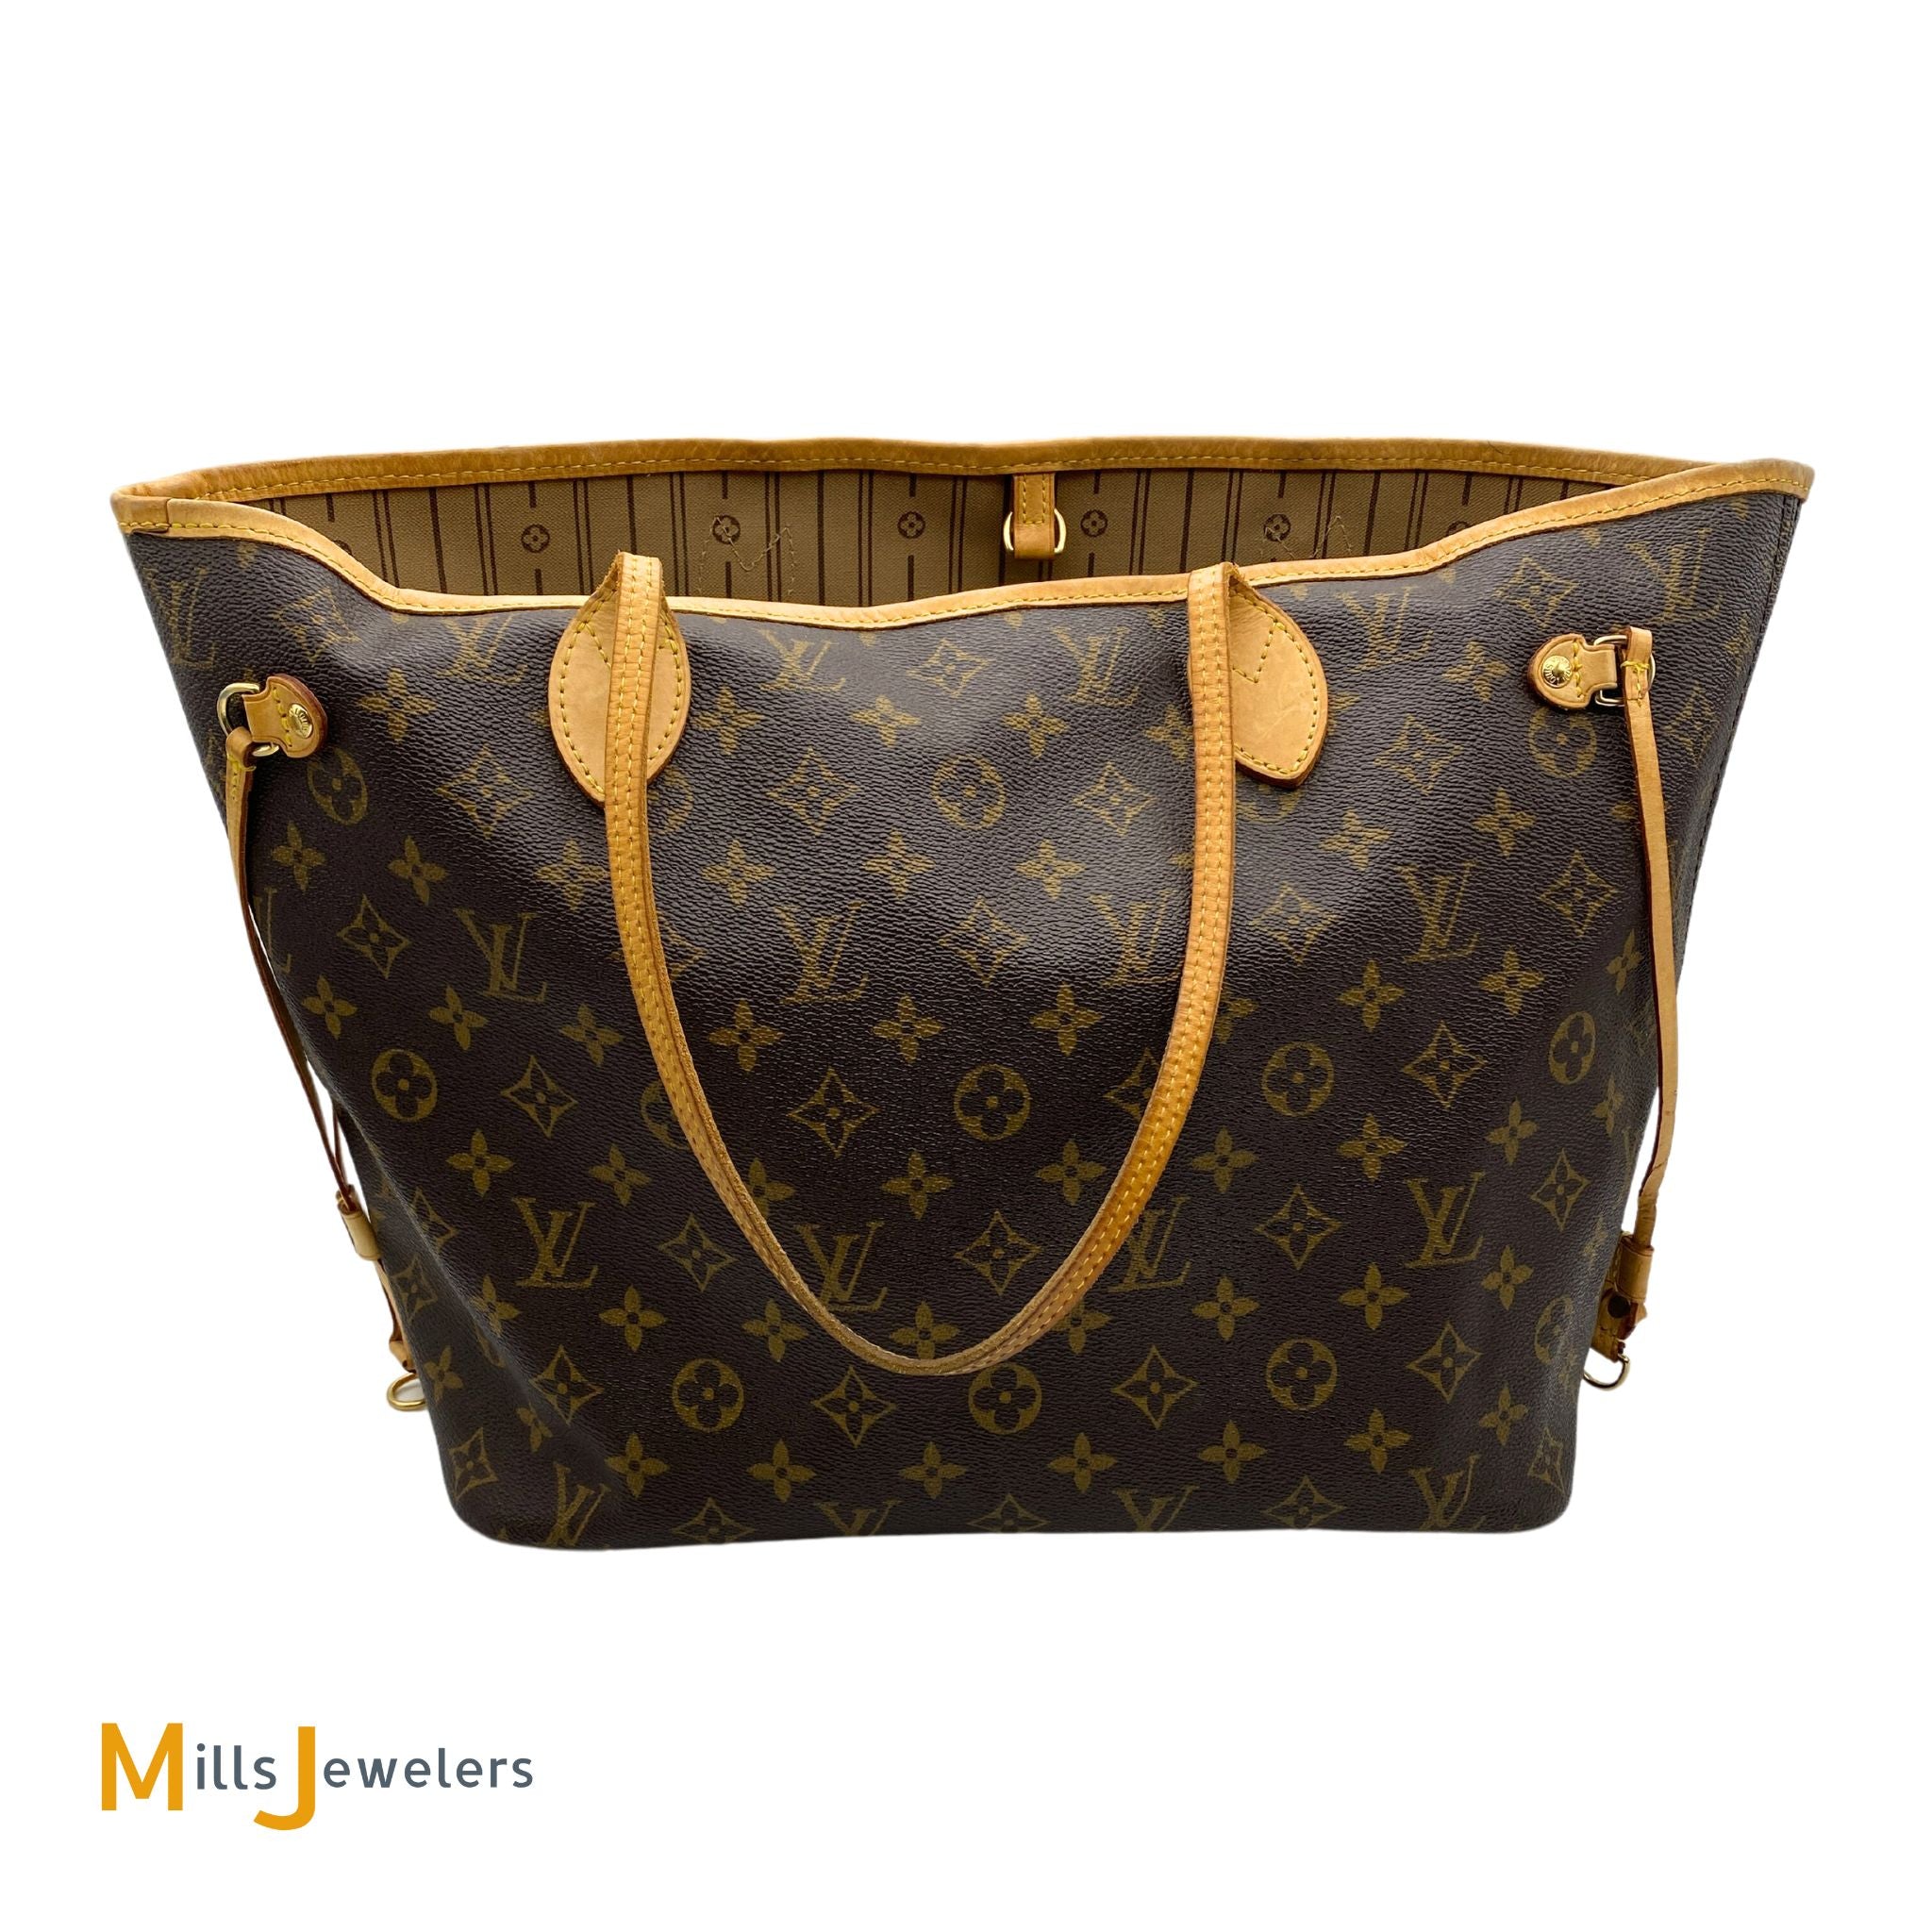 Neverfull MM Damier Tote bag in Monogram coated canvas, Hardware